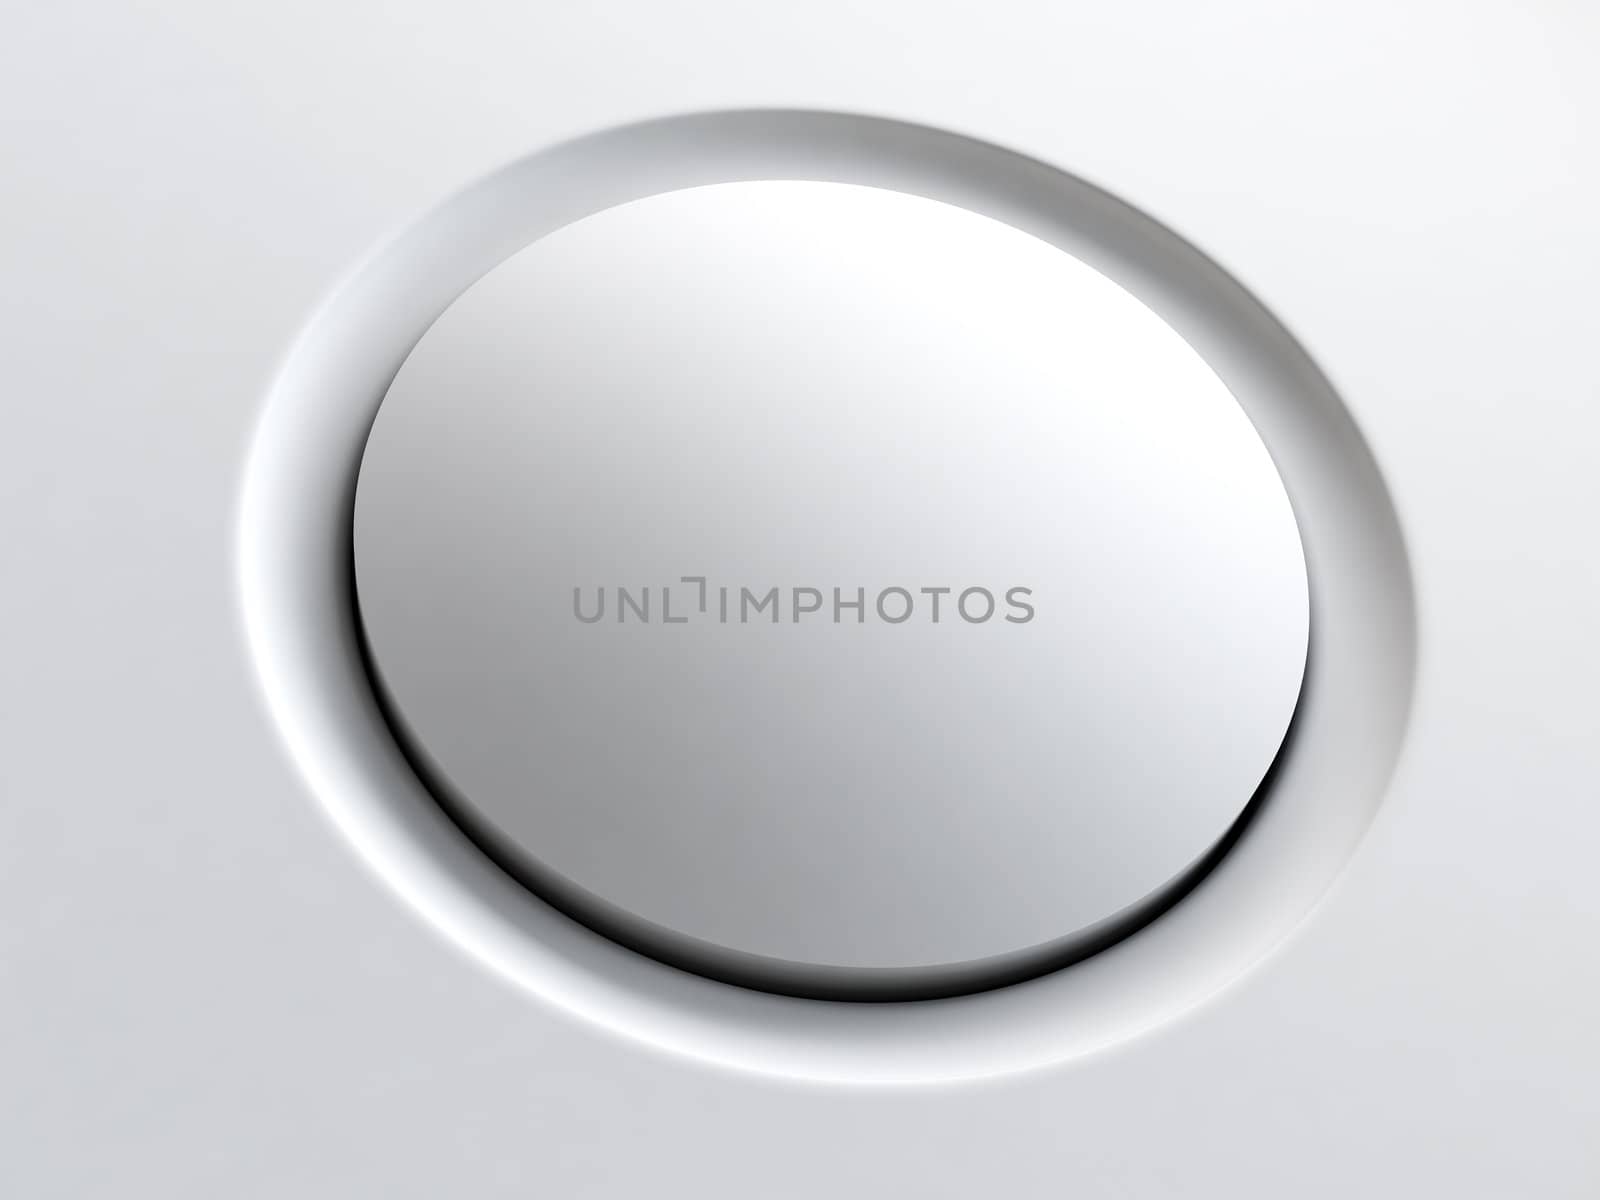 simple plastic round button of modern device or gadget